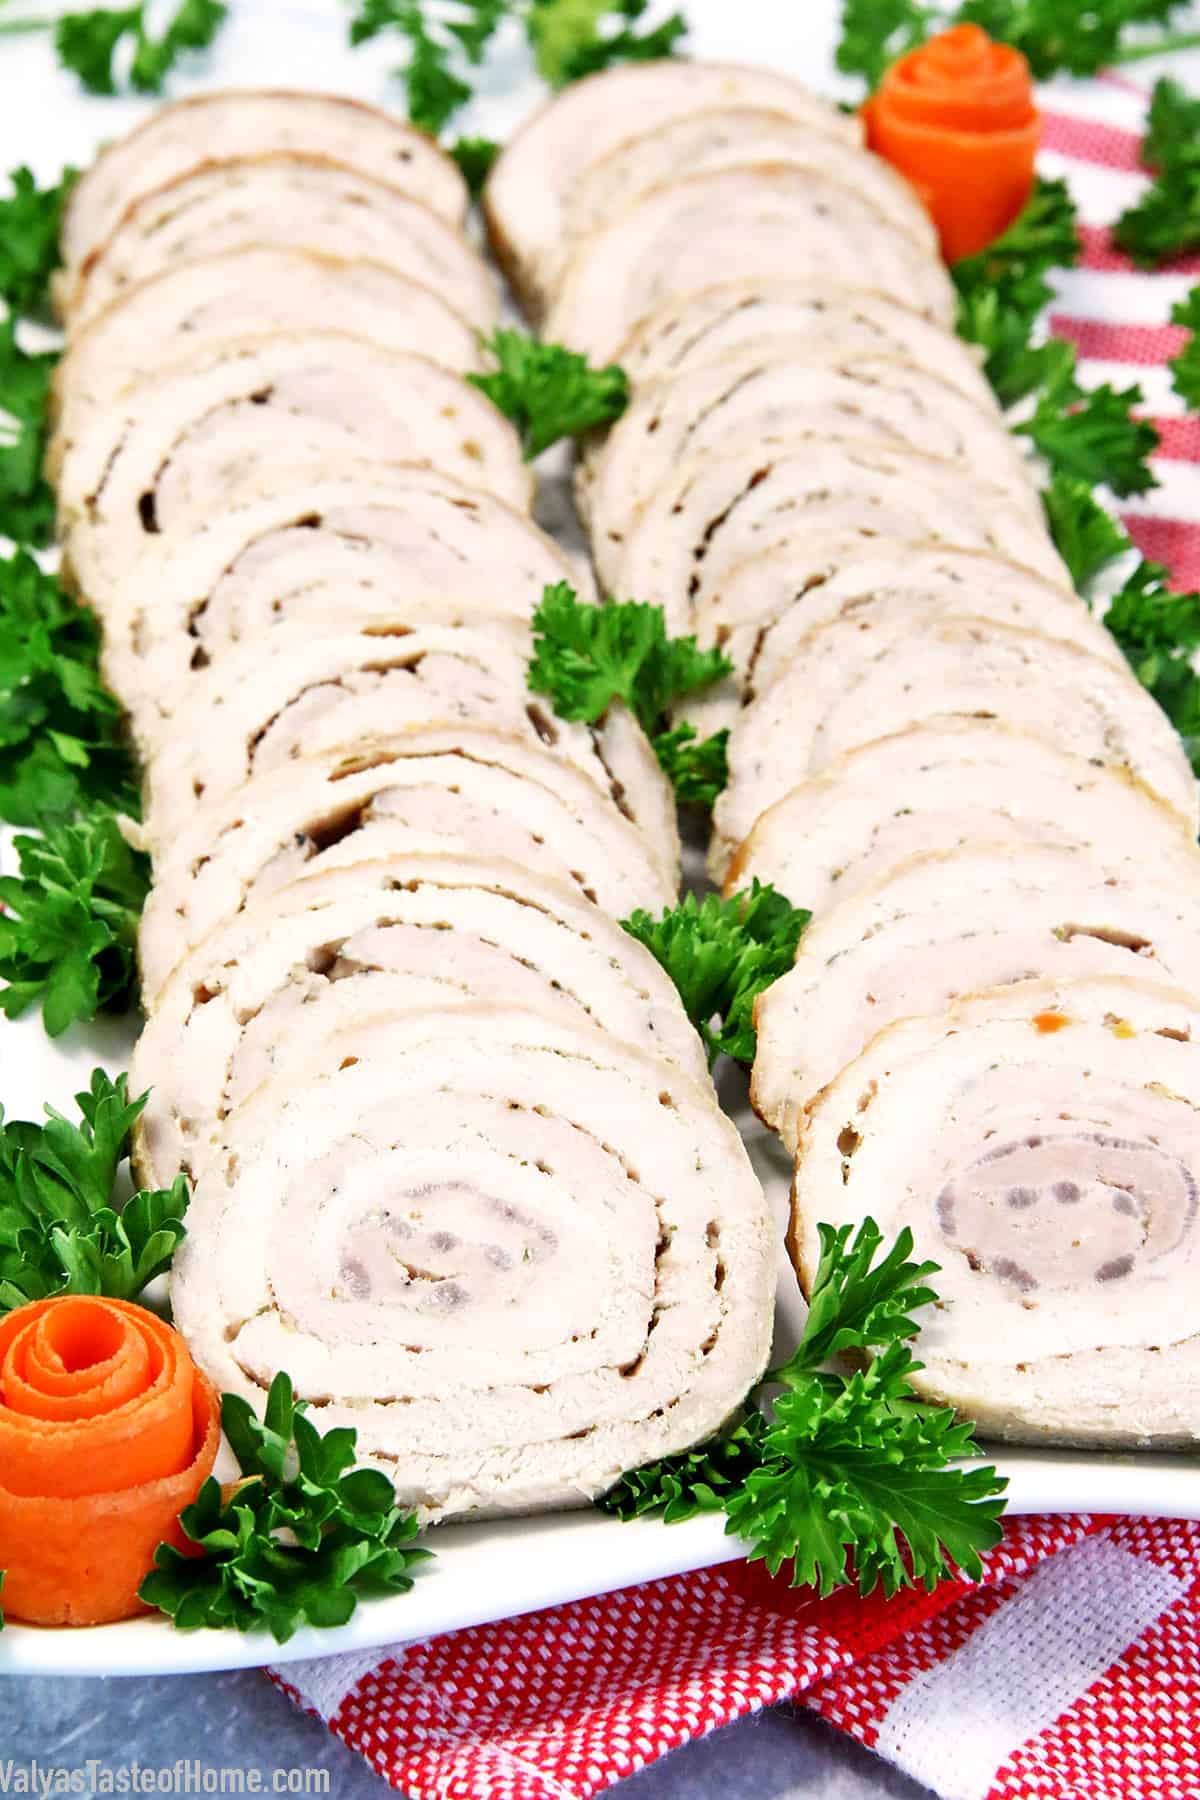 This Pork Meat Roulette is a fairly special traditional Ukrainian recipe that is usually passed down in the family and mostly brought out for special occasions. It is unique, scrumptious and perfect for your Christmas dinner! 